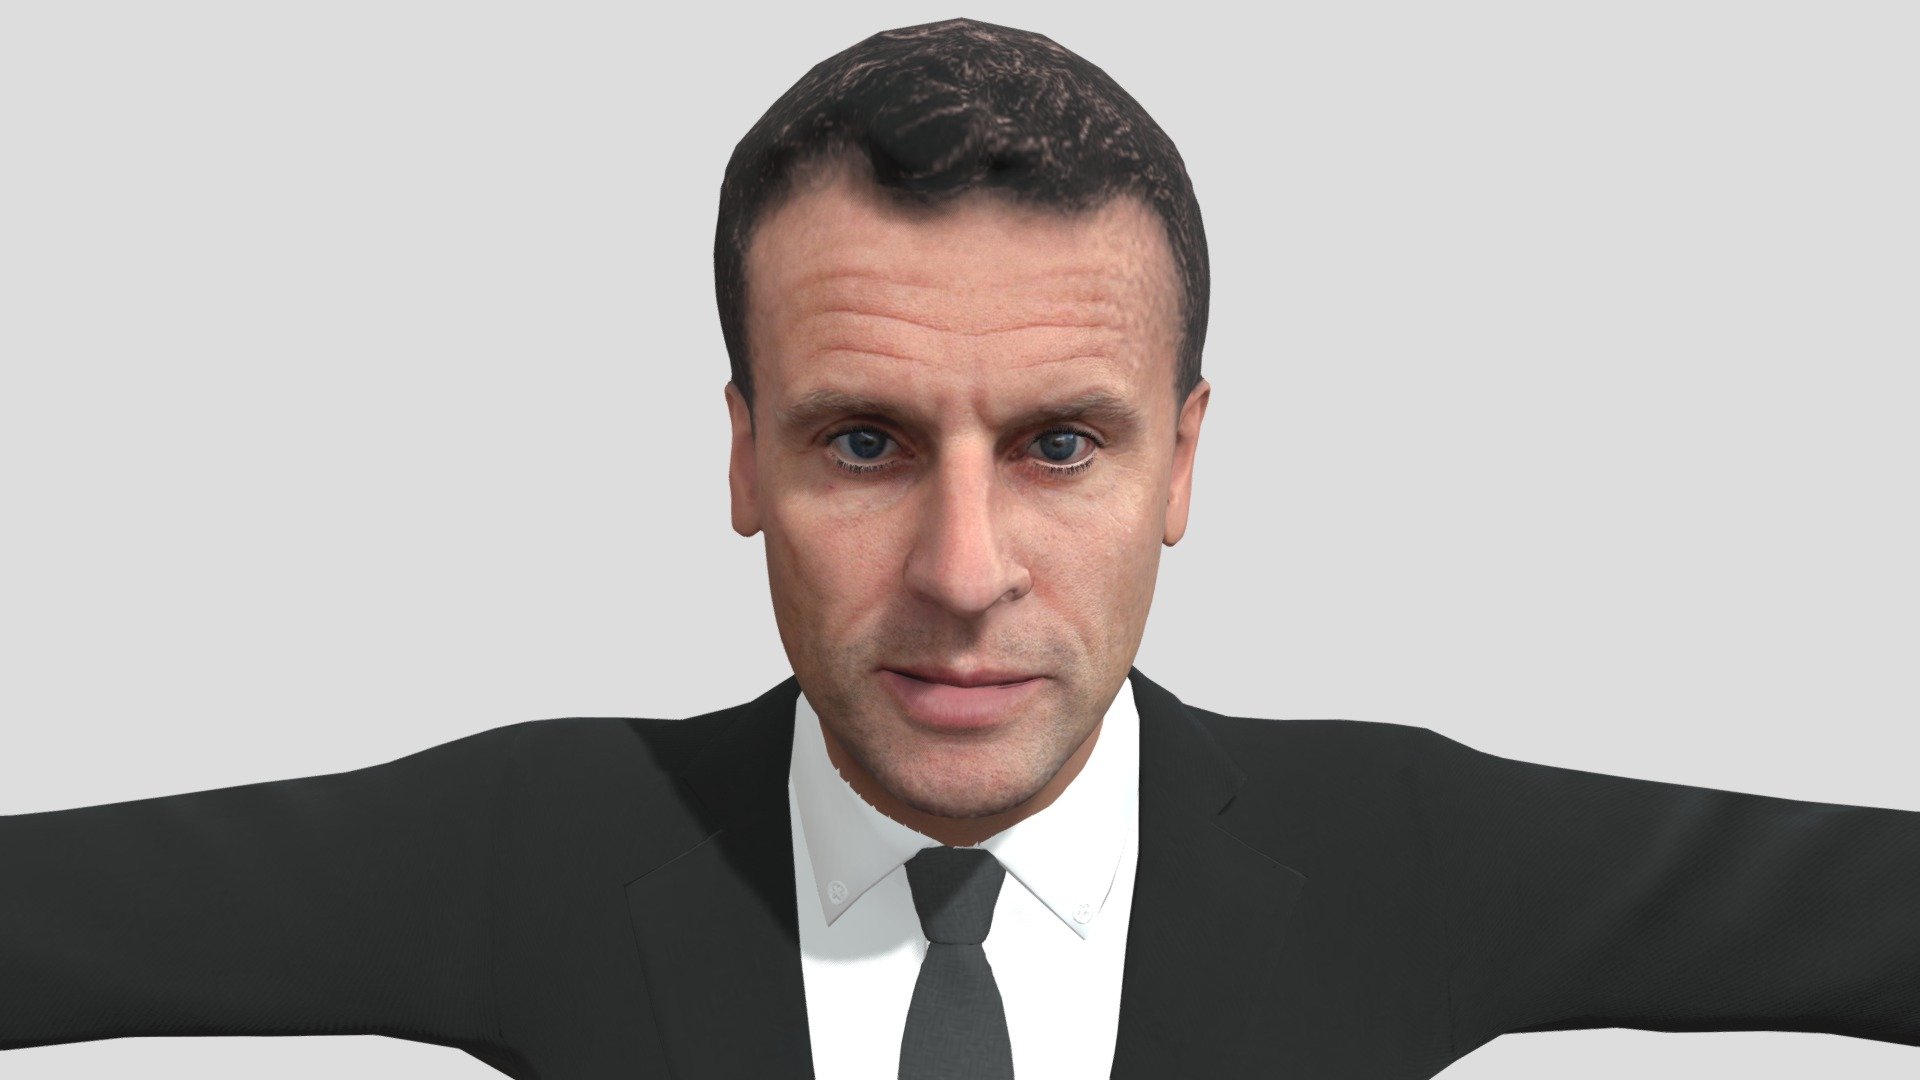 Emmanuel Macron is a French politician who has served as President of France since 2017 - Emmanuel M 3d model